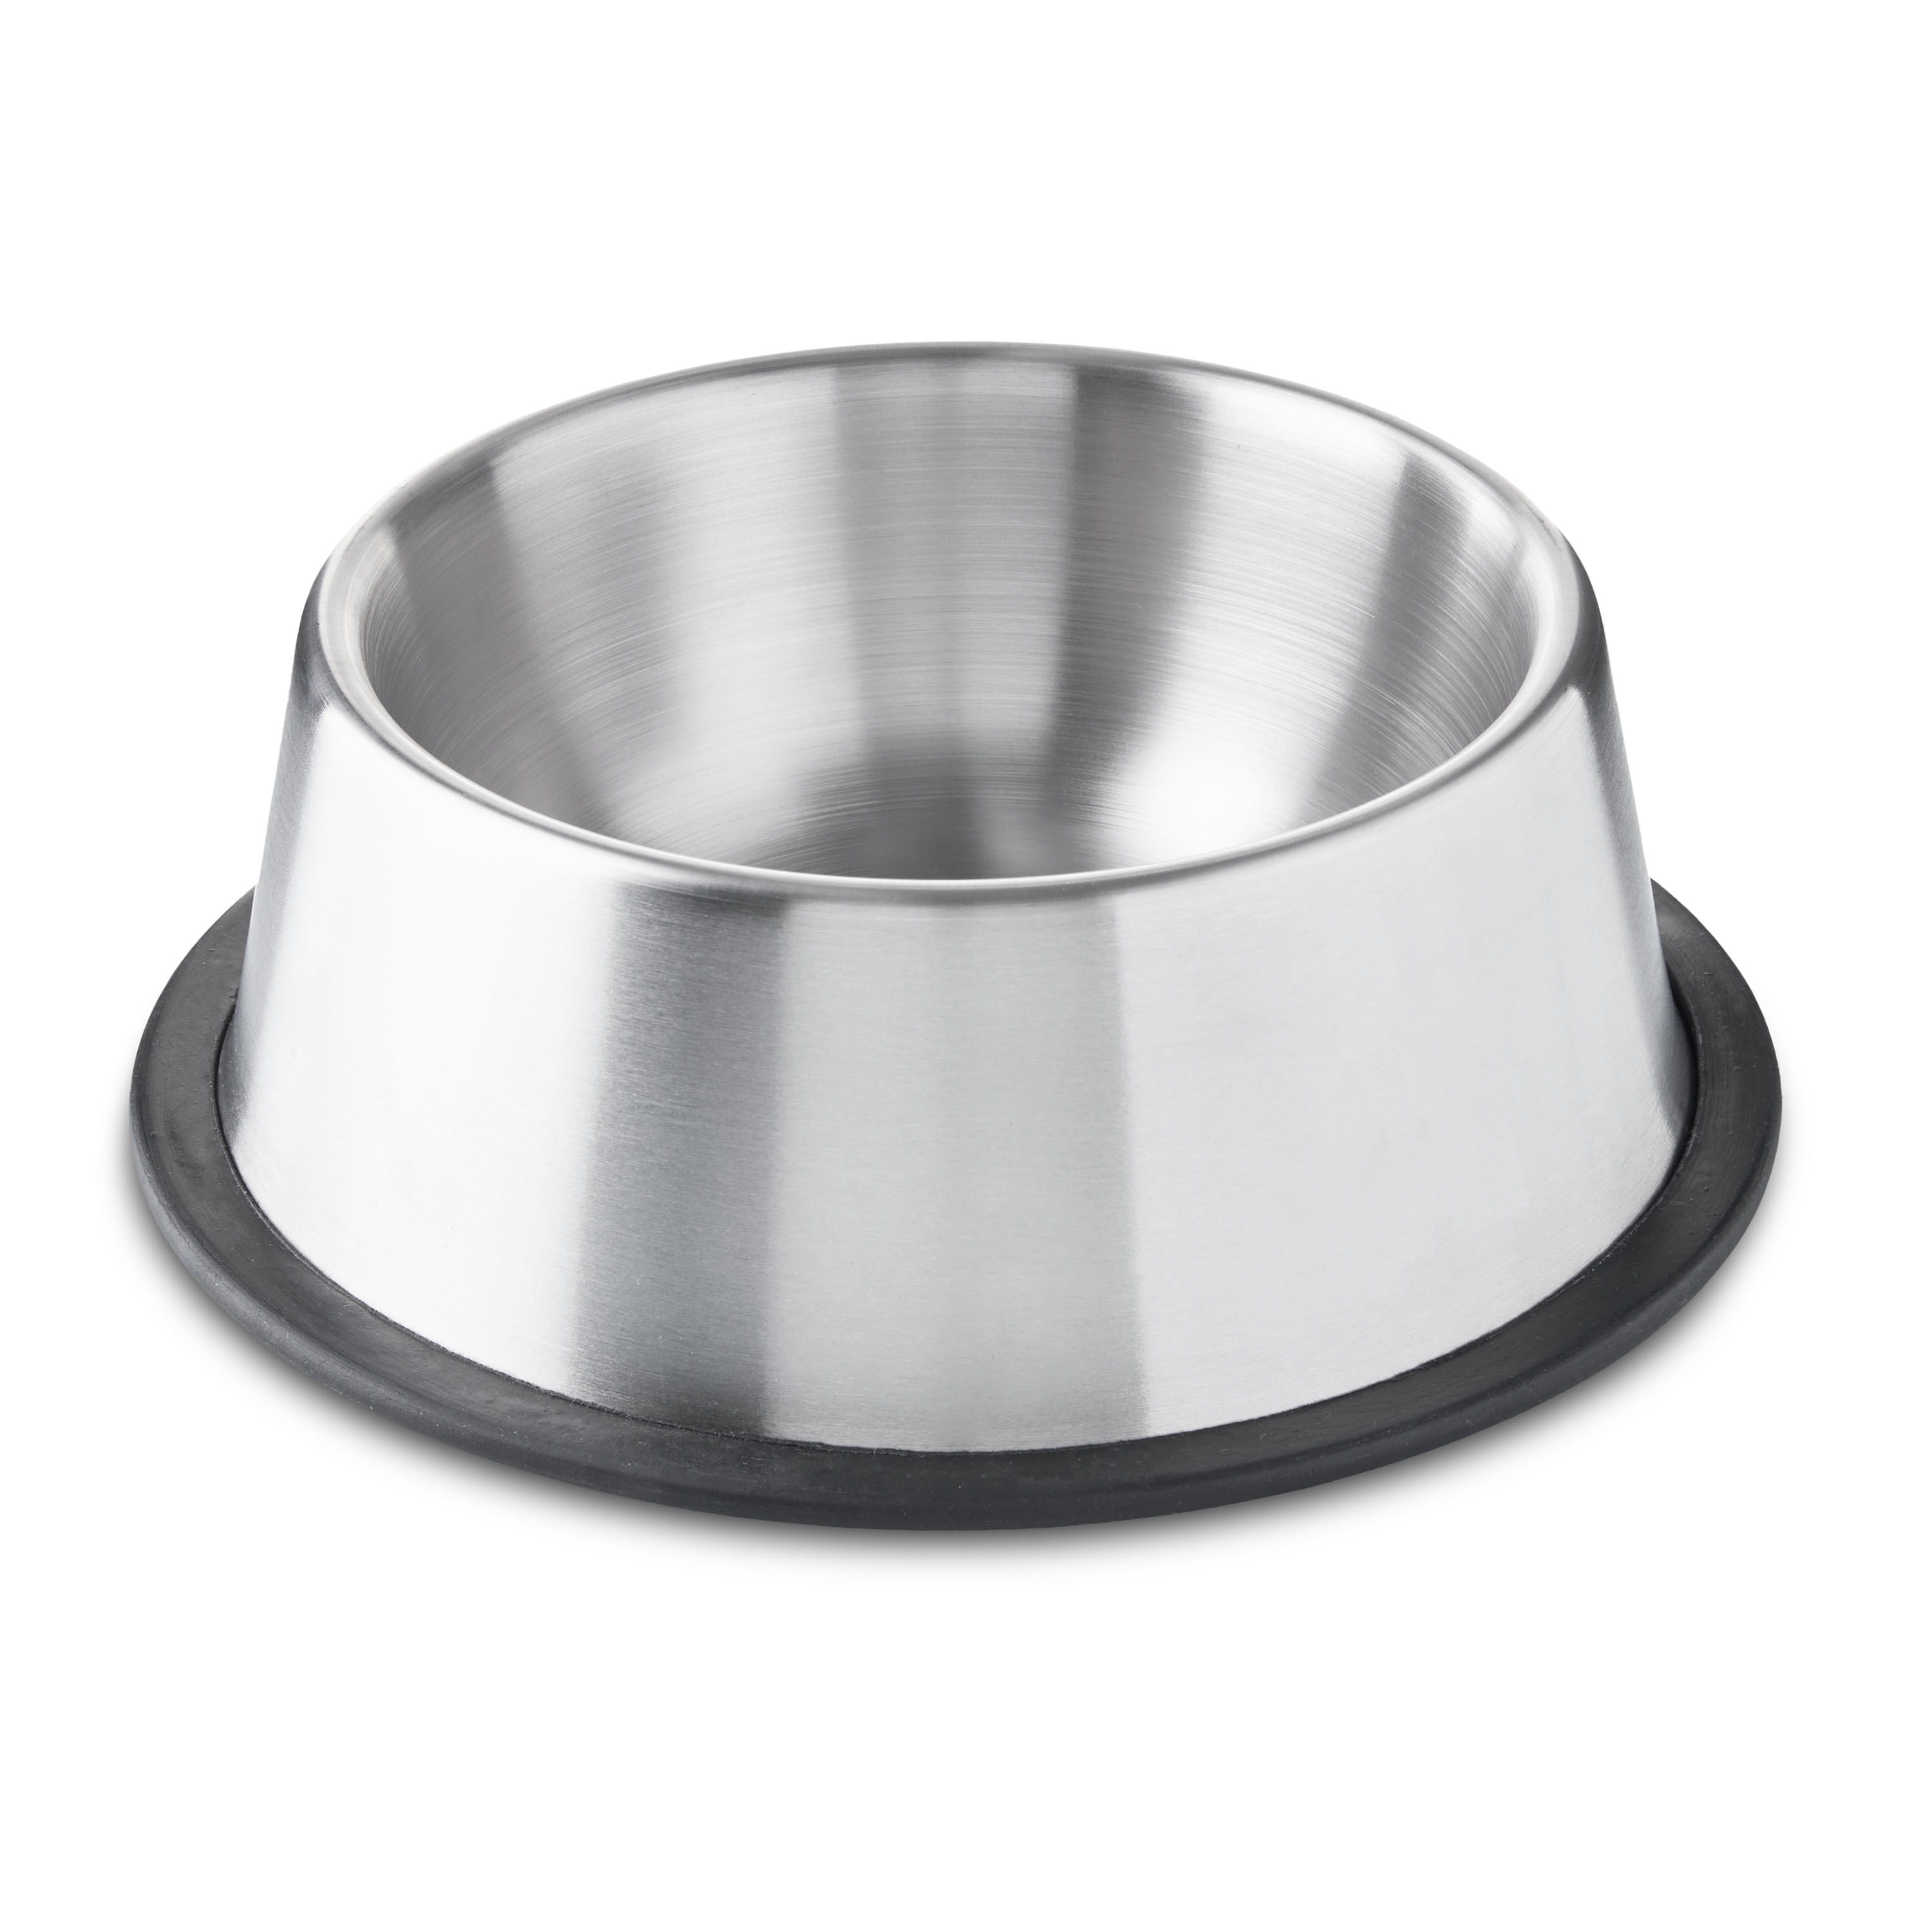 Red - Food & Water Bowls 2 Pack Stainless Steel Cup w/ Holder 10 oz. 